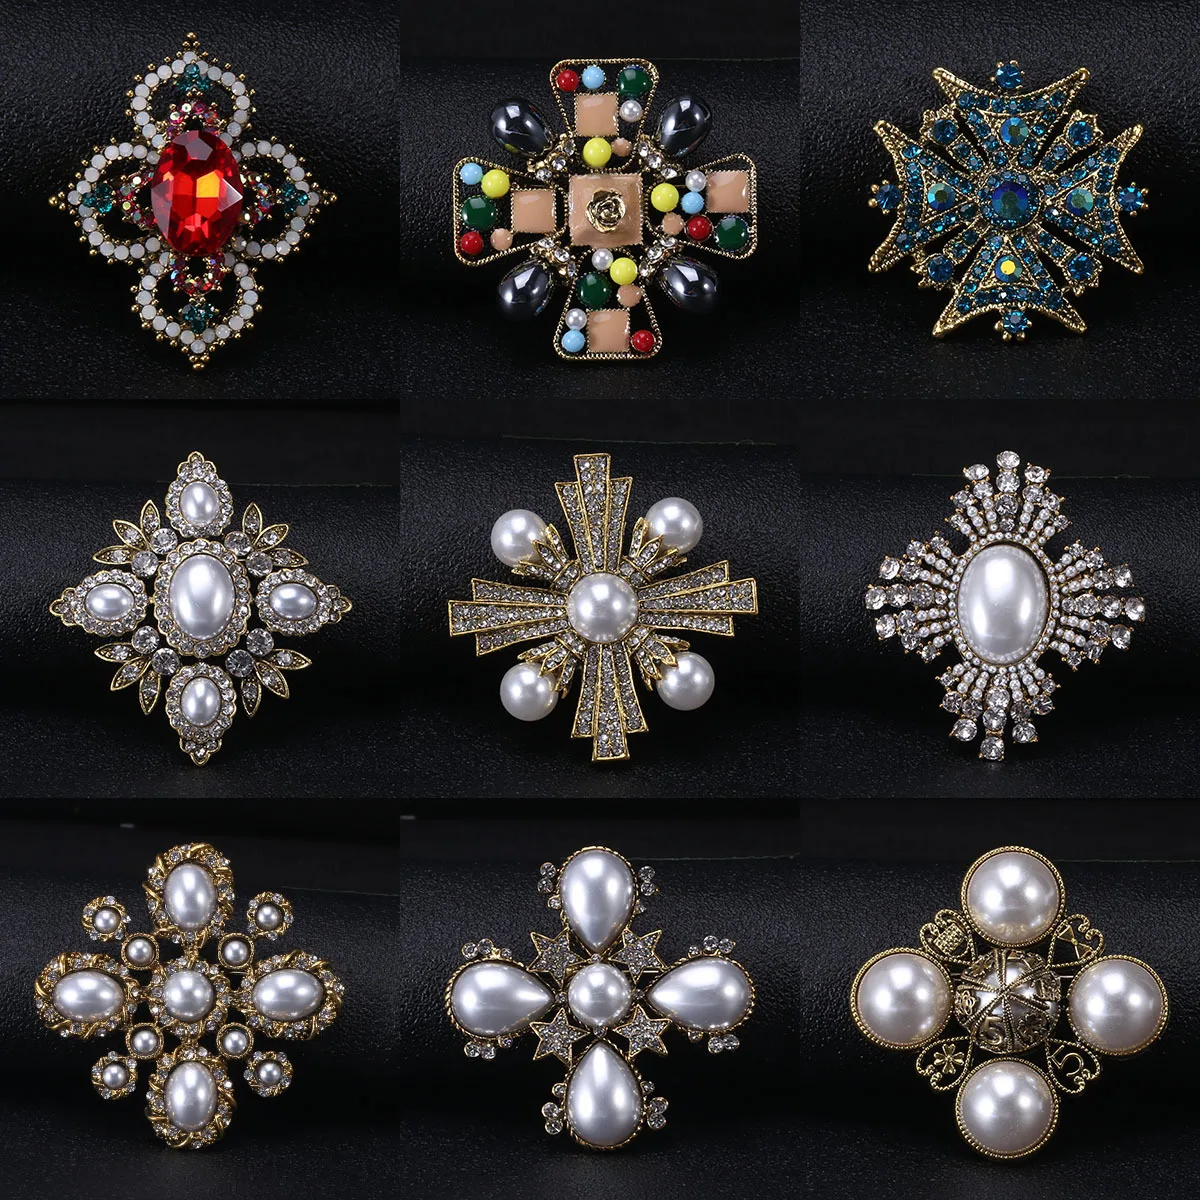 

SKEDS Baroque Women Girls Cross Pearl Crystal Badges Jewelry Vintage Classic Palace Brooches Pins Retro Lady Elegant Corsage Pin